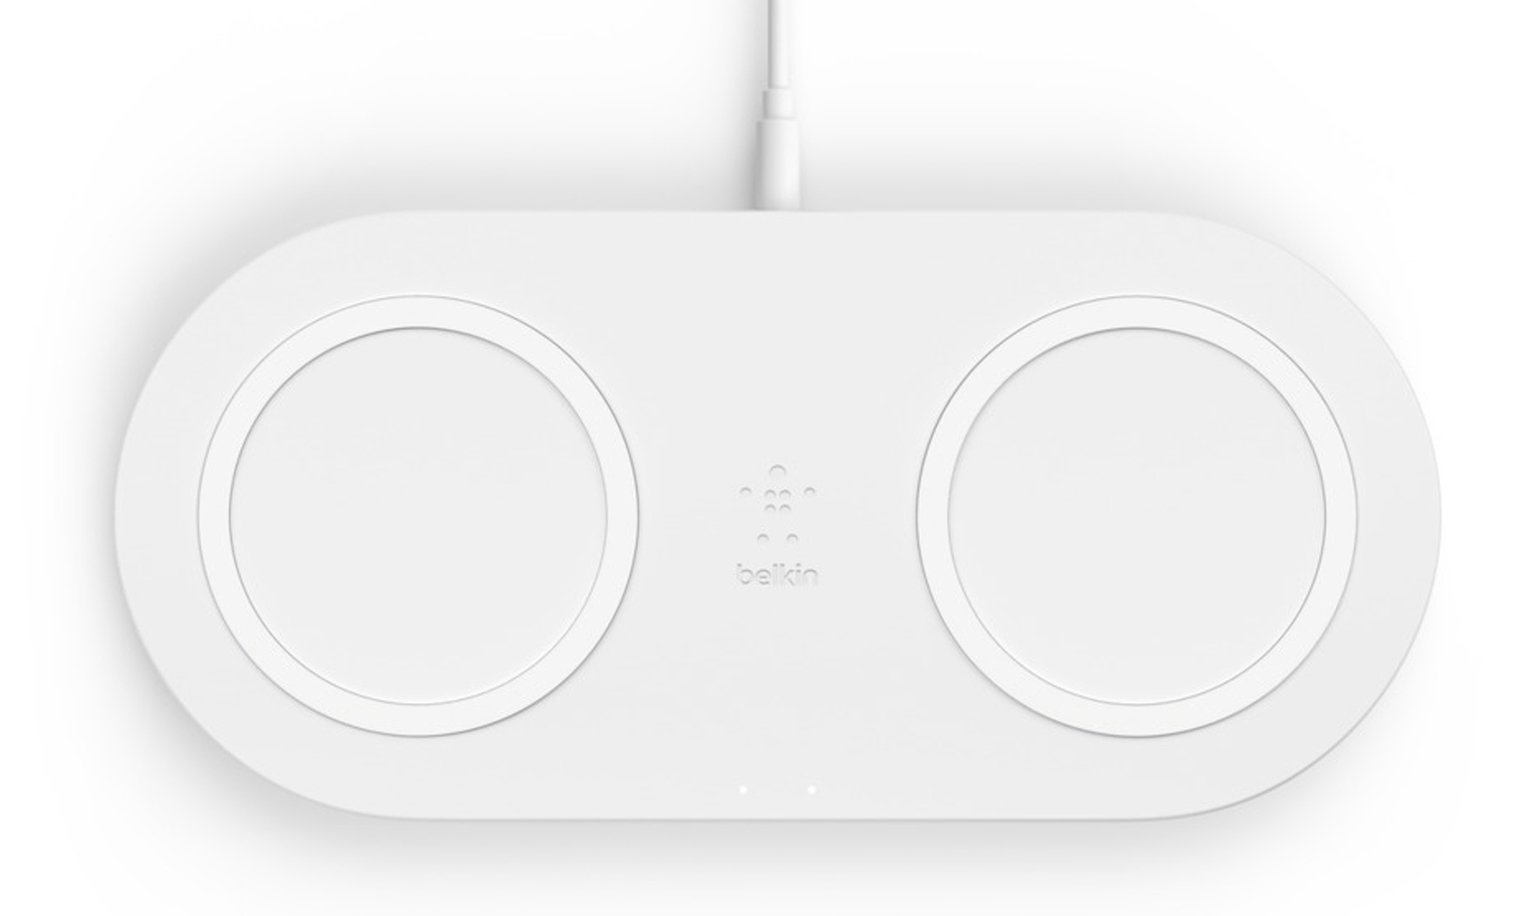 Belkin Qi Enabled 10W Dual Wireless Charging Pad Review